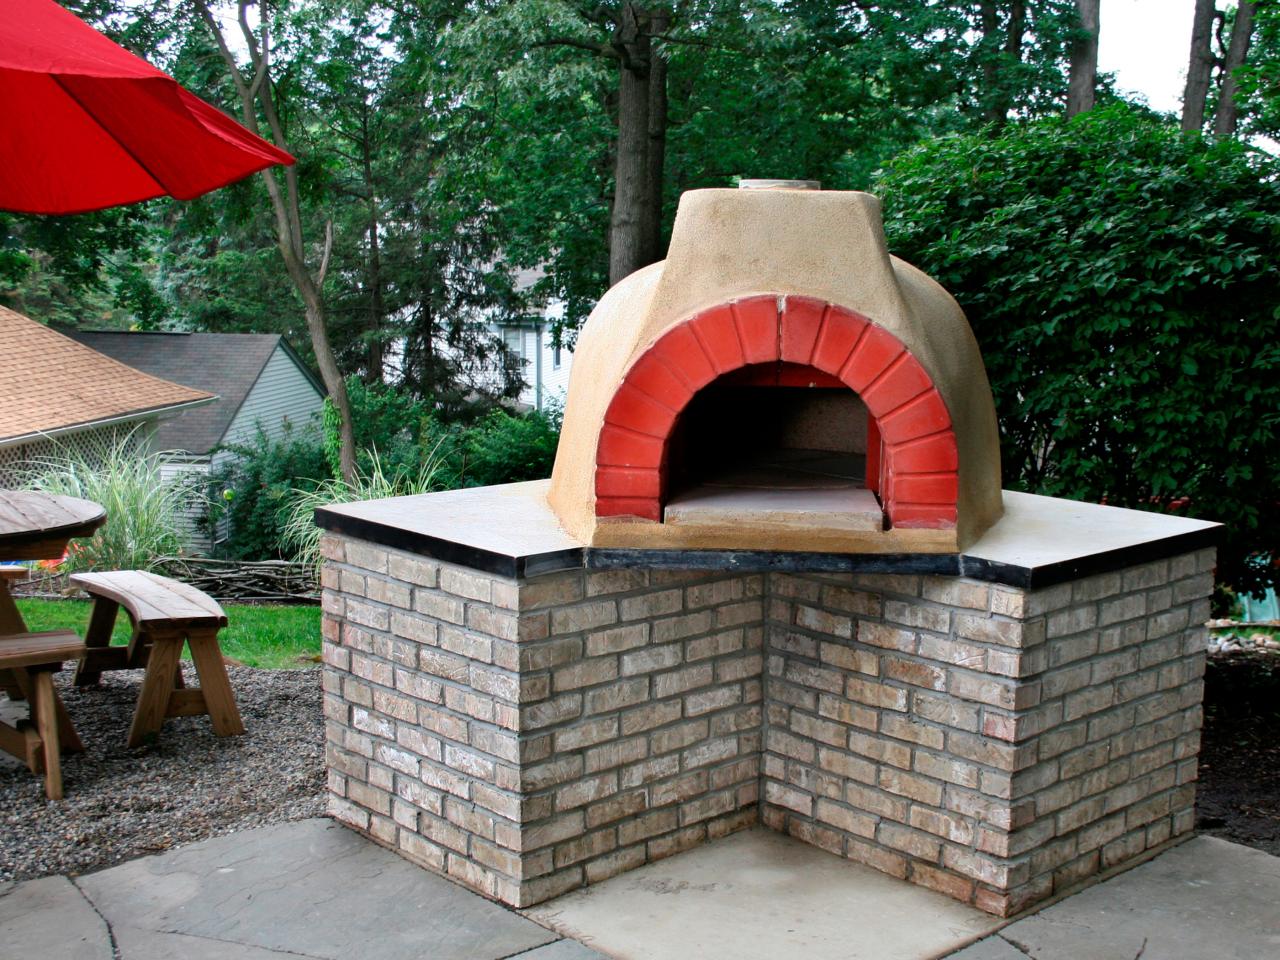 How to build a outdoor oven